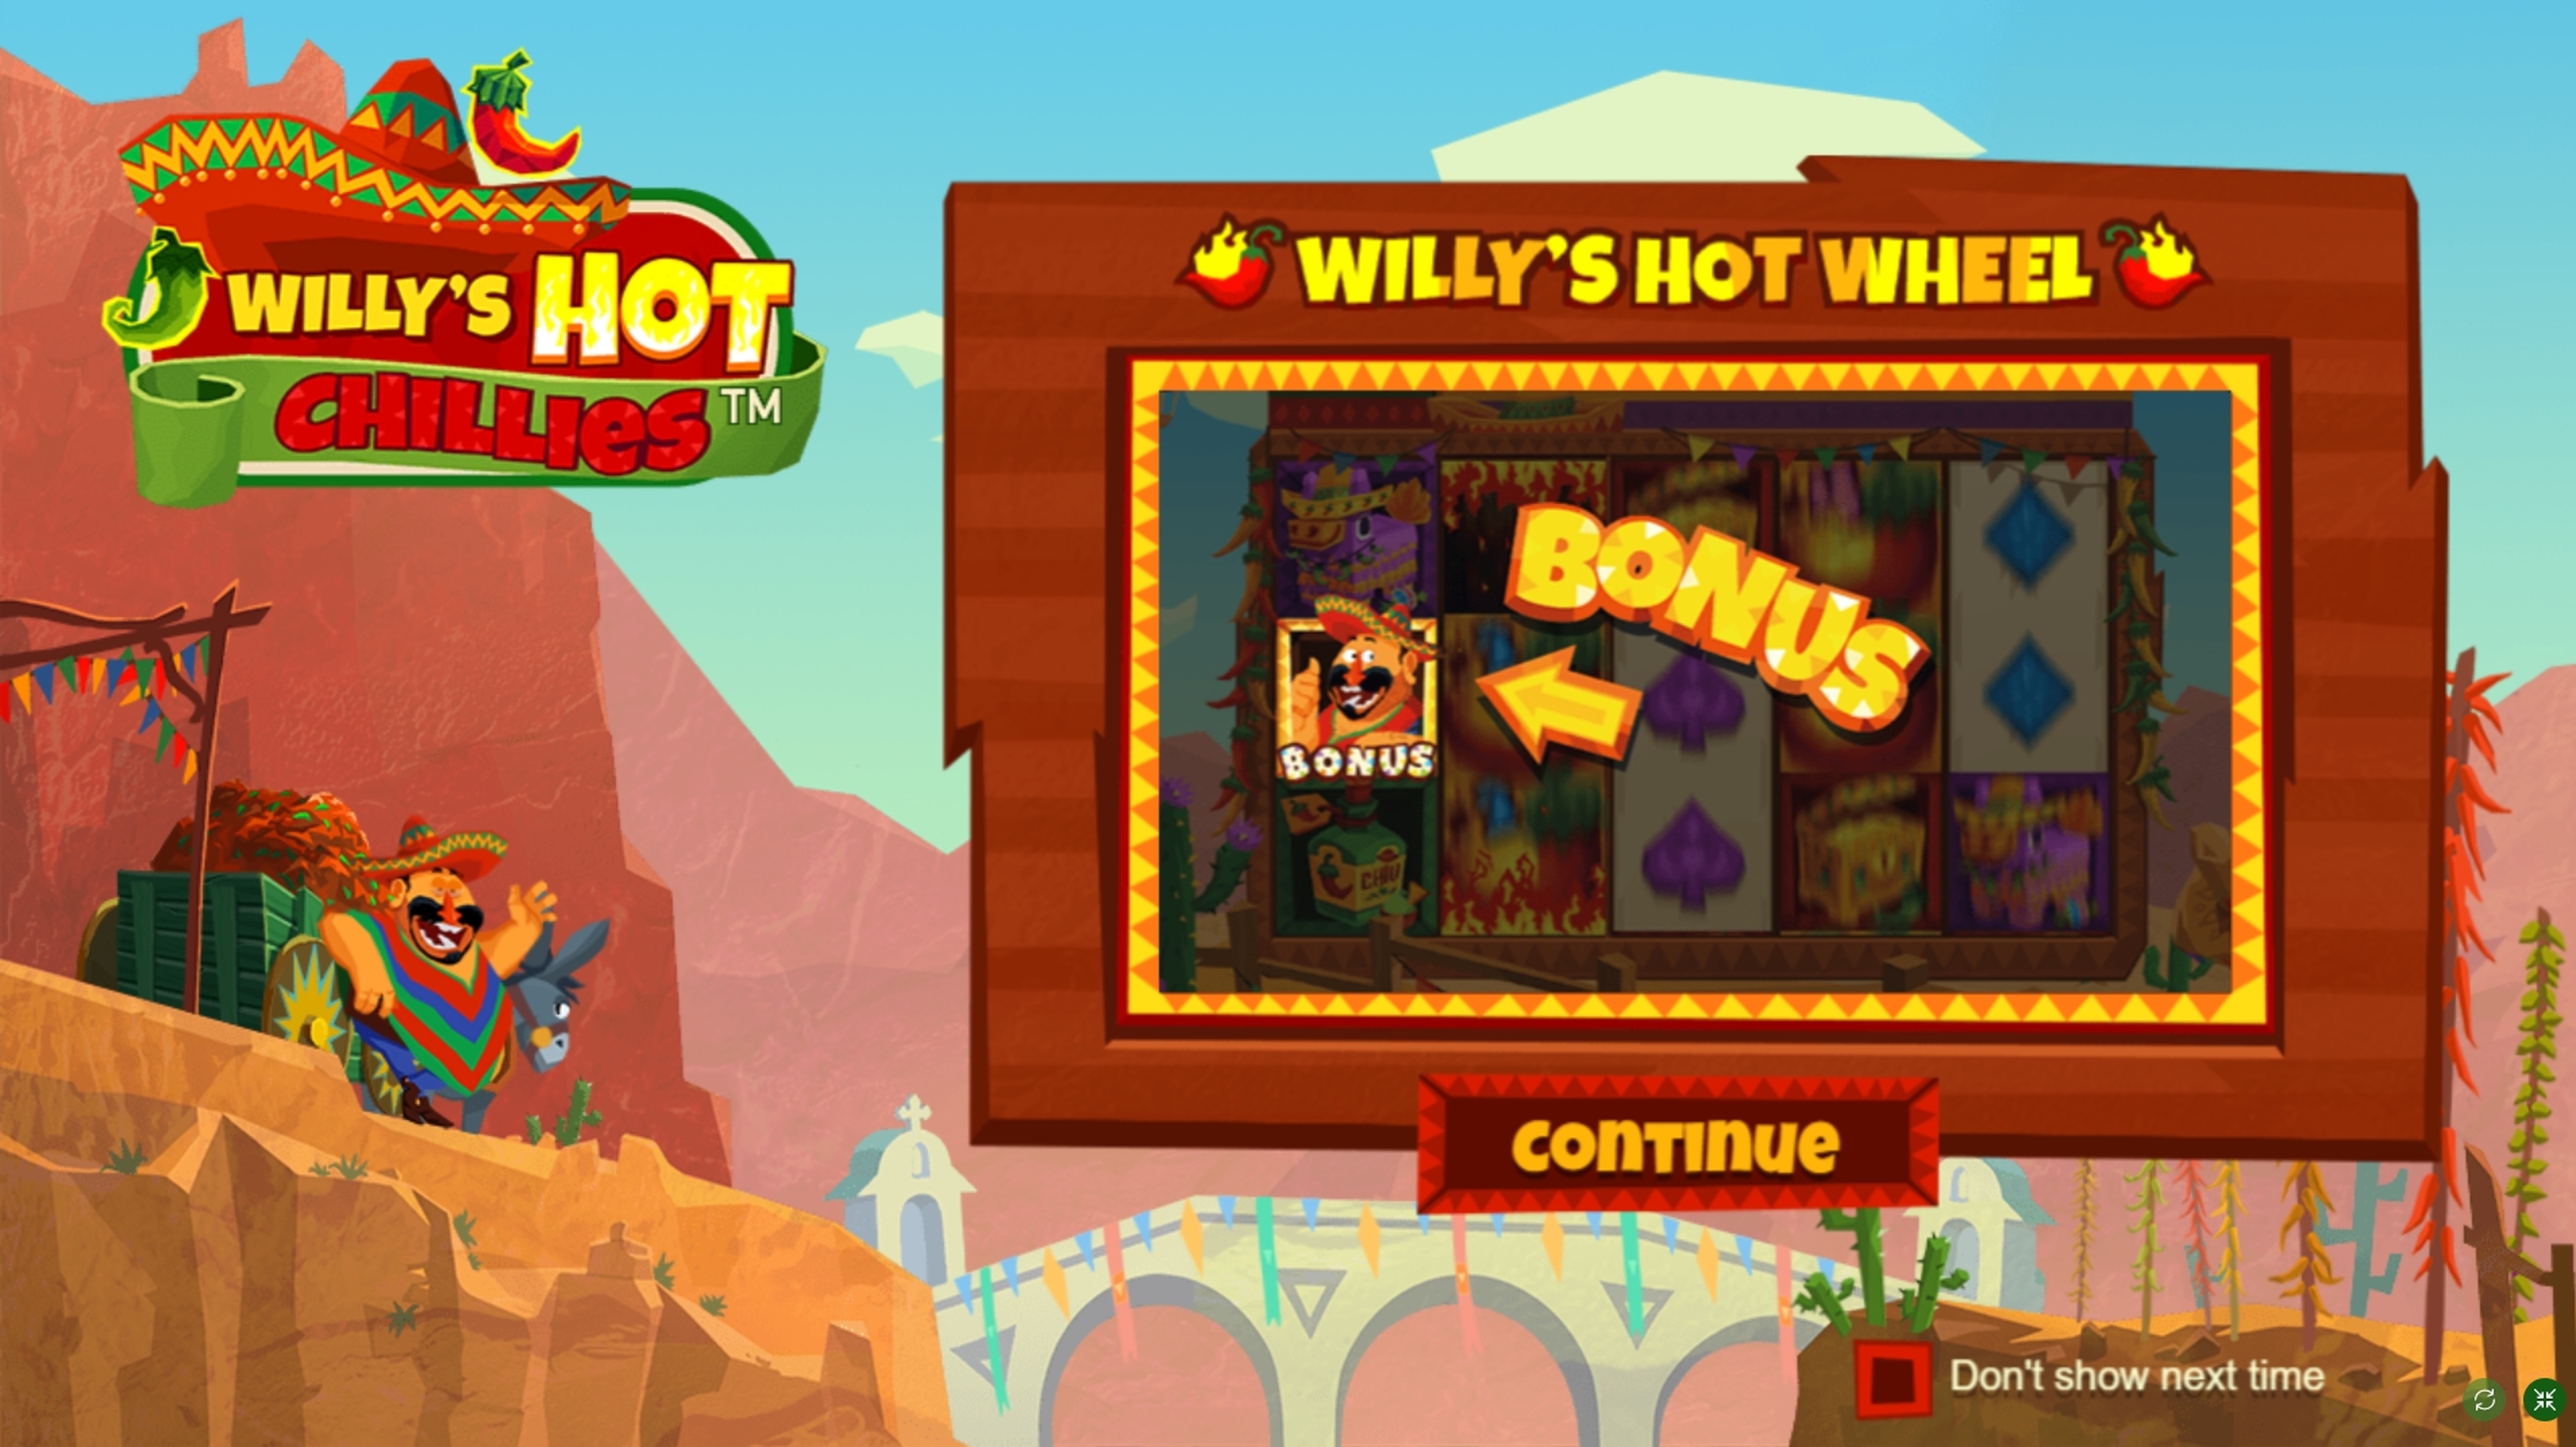 Play Willys Hot Chillies Free Casino Slot Game by NetEnt